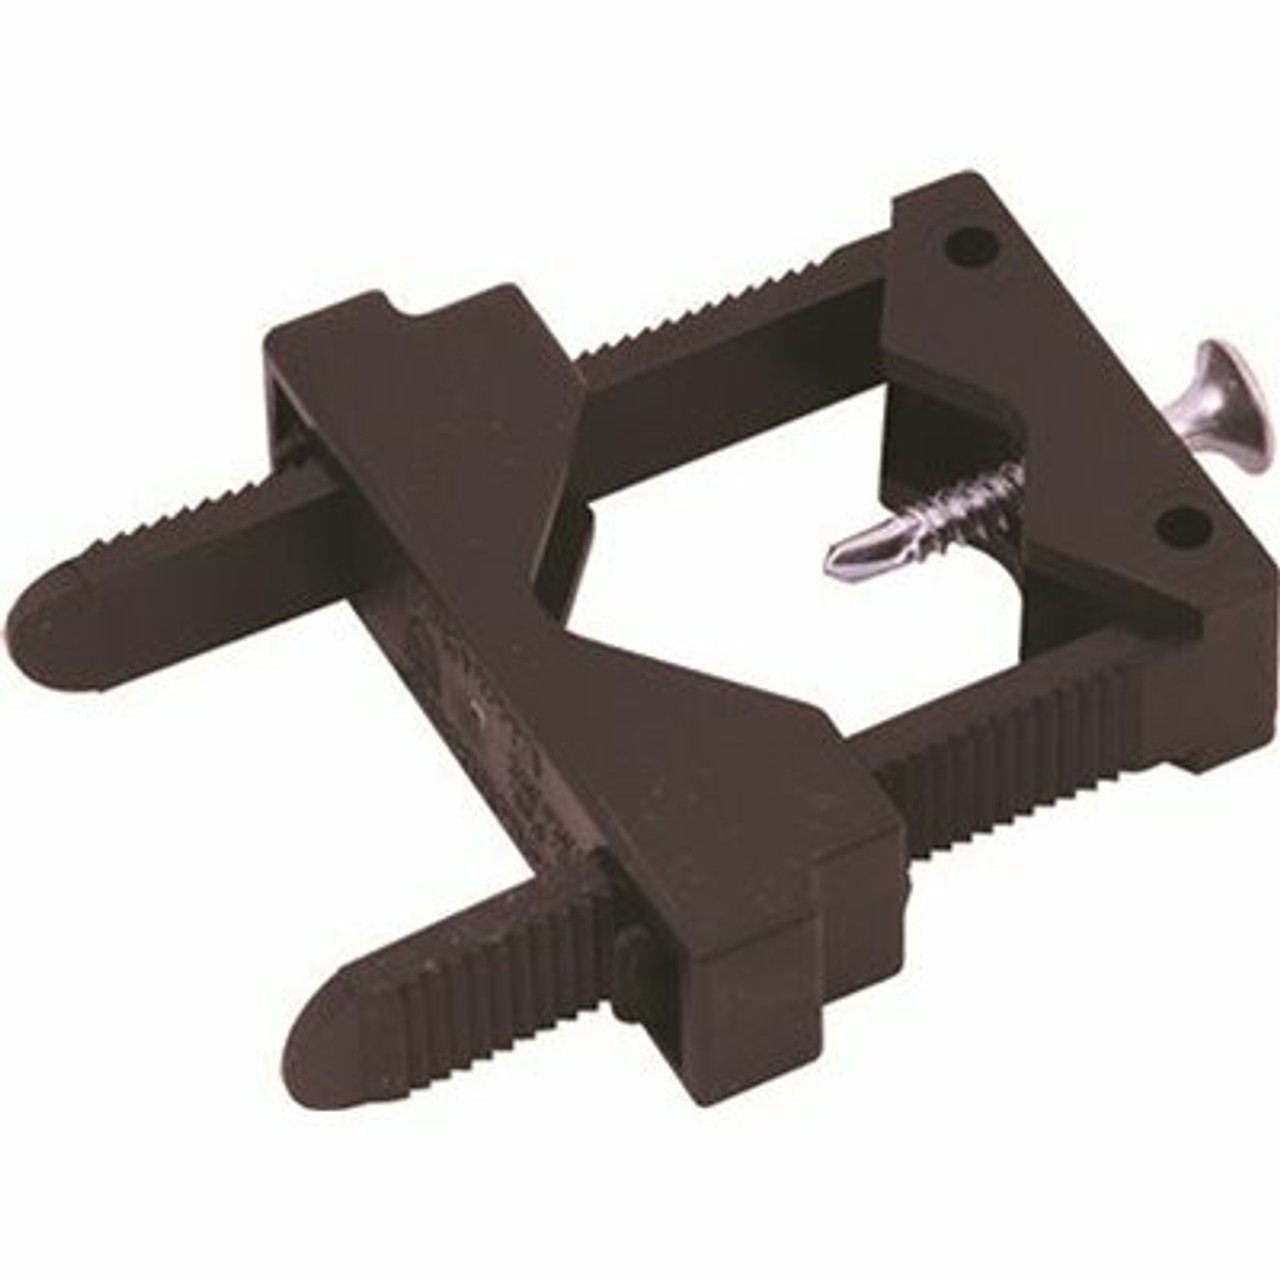 Sioux Chief Touchdown Clamp 3/8 In. X 1-1/8 In. Od